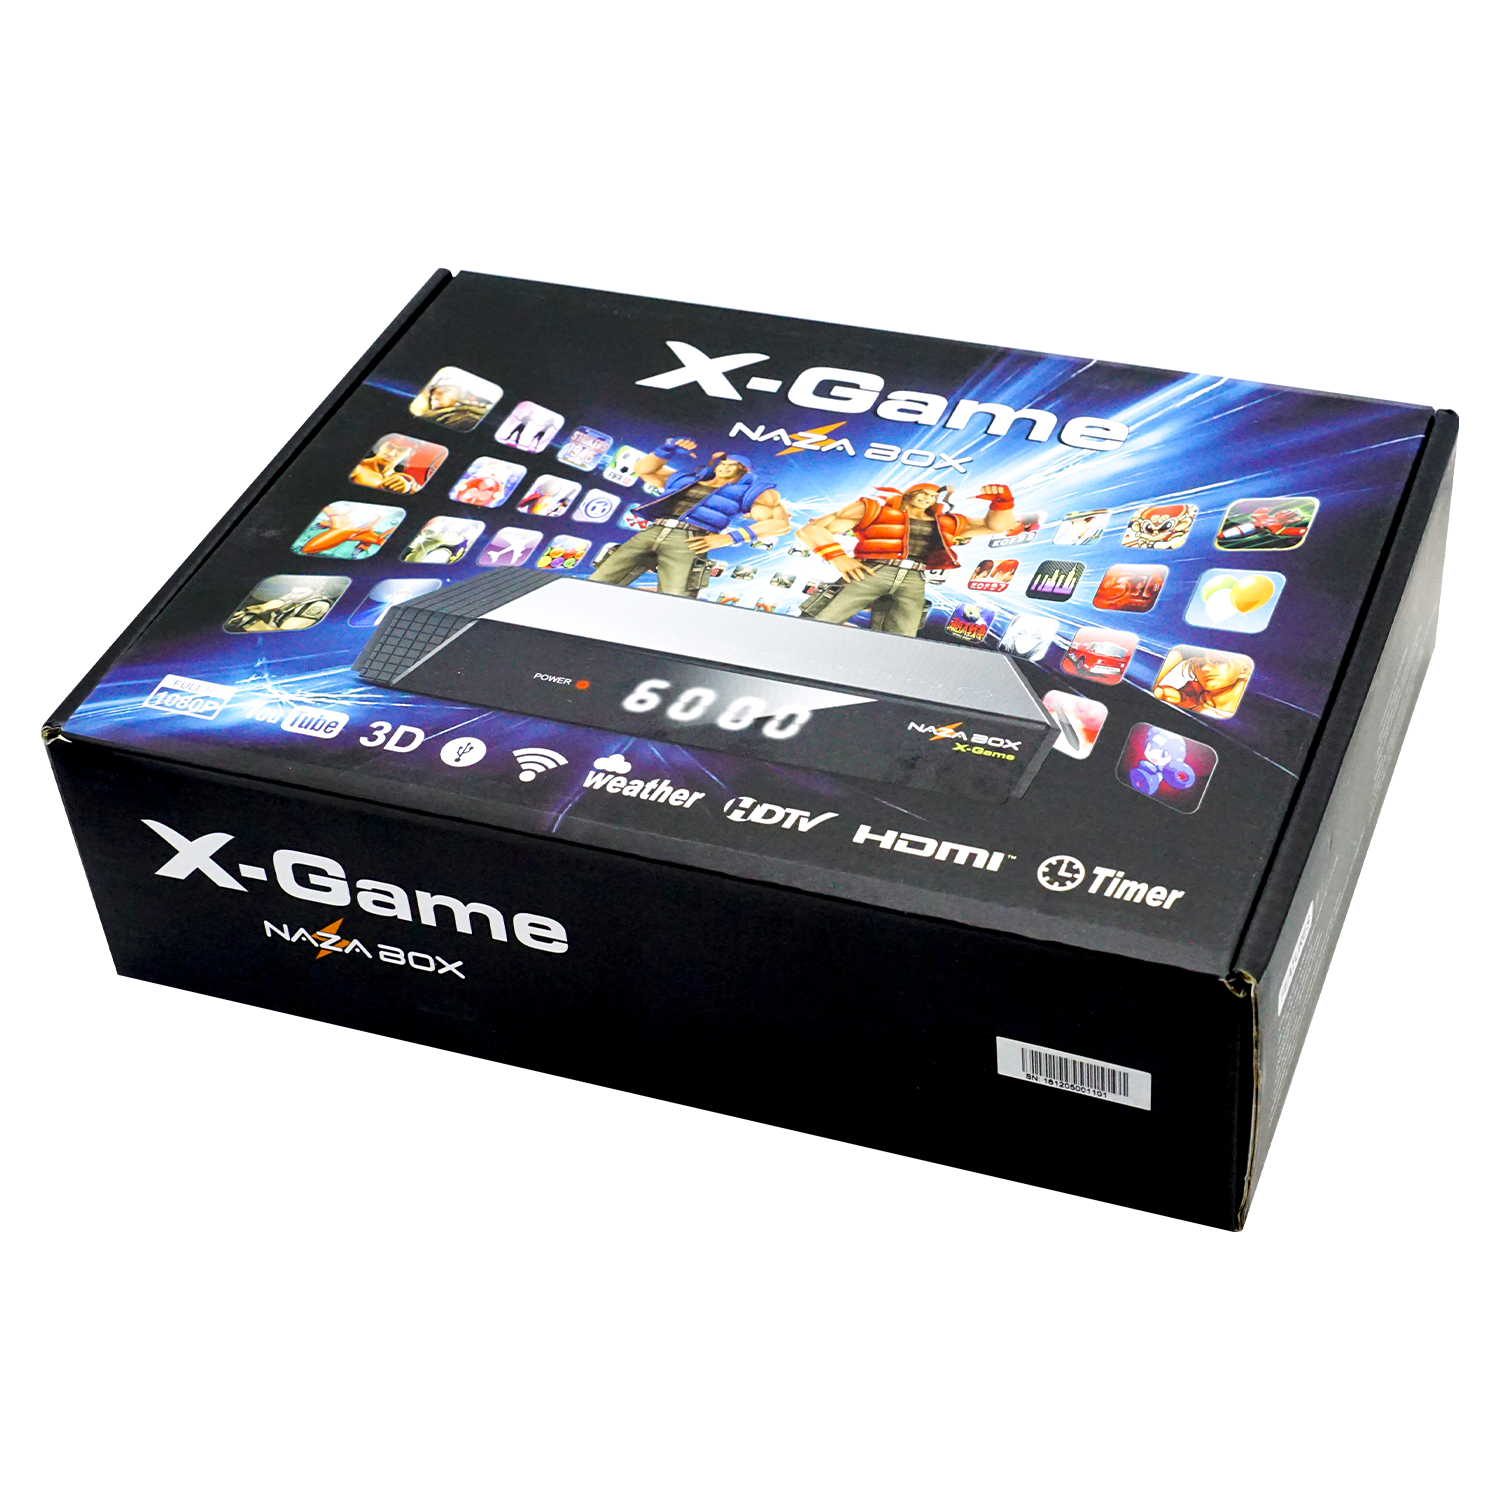 Receptor Naza Box X-Game SKS / IKS / WIFI FULL HD Android